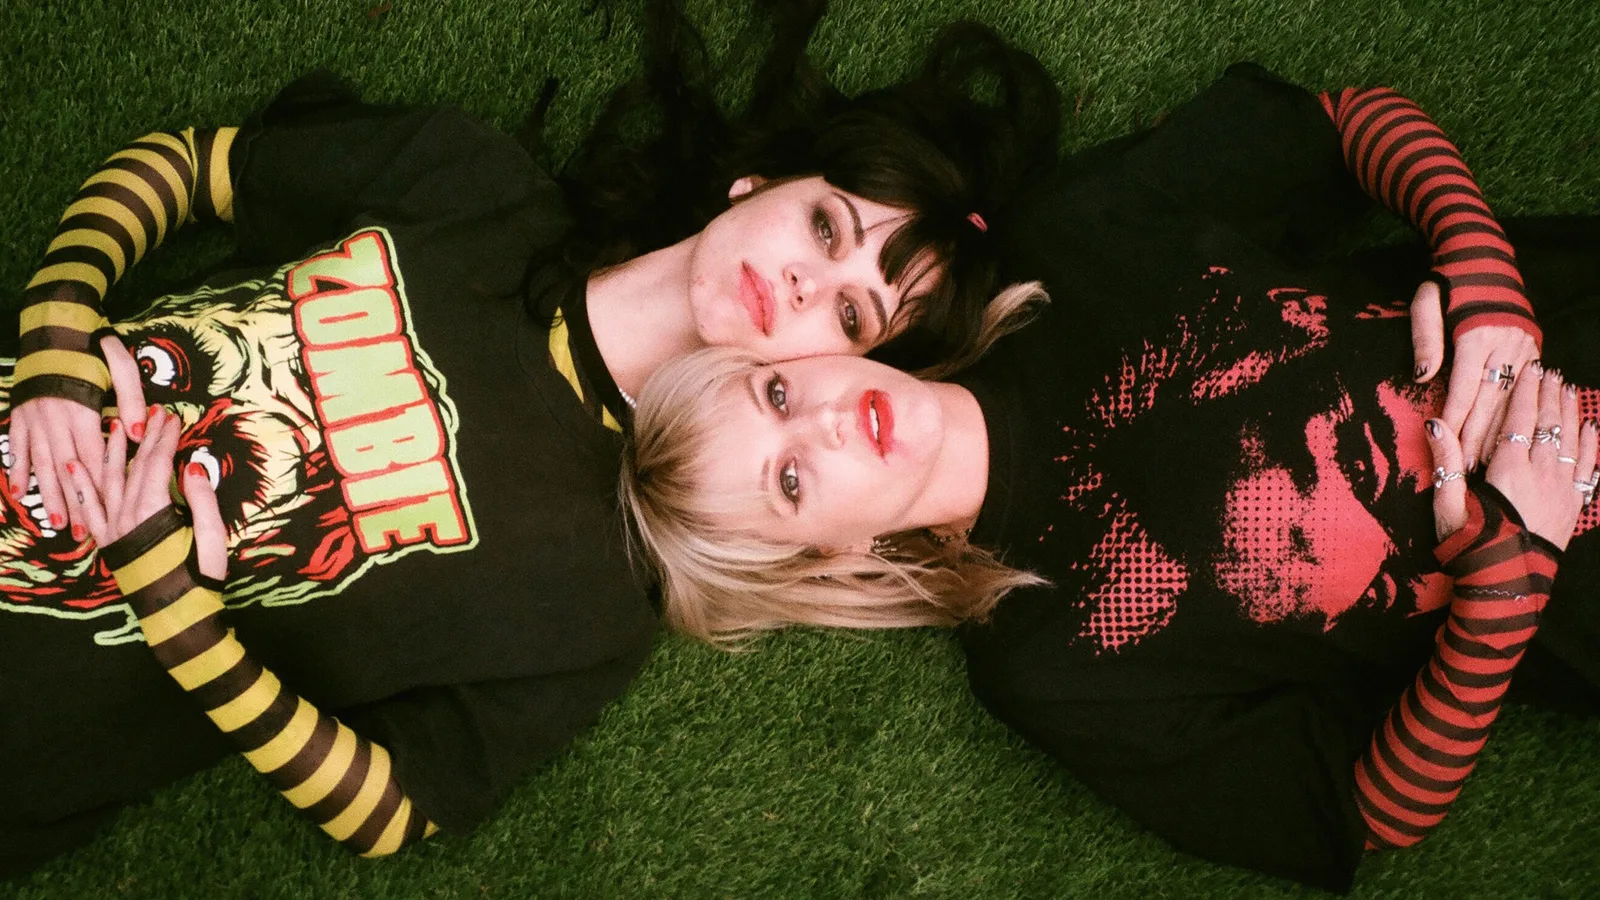 Mija and GG Magree of So Tuff So Cute lie on a grassy field, heads cradles against each other